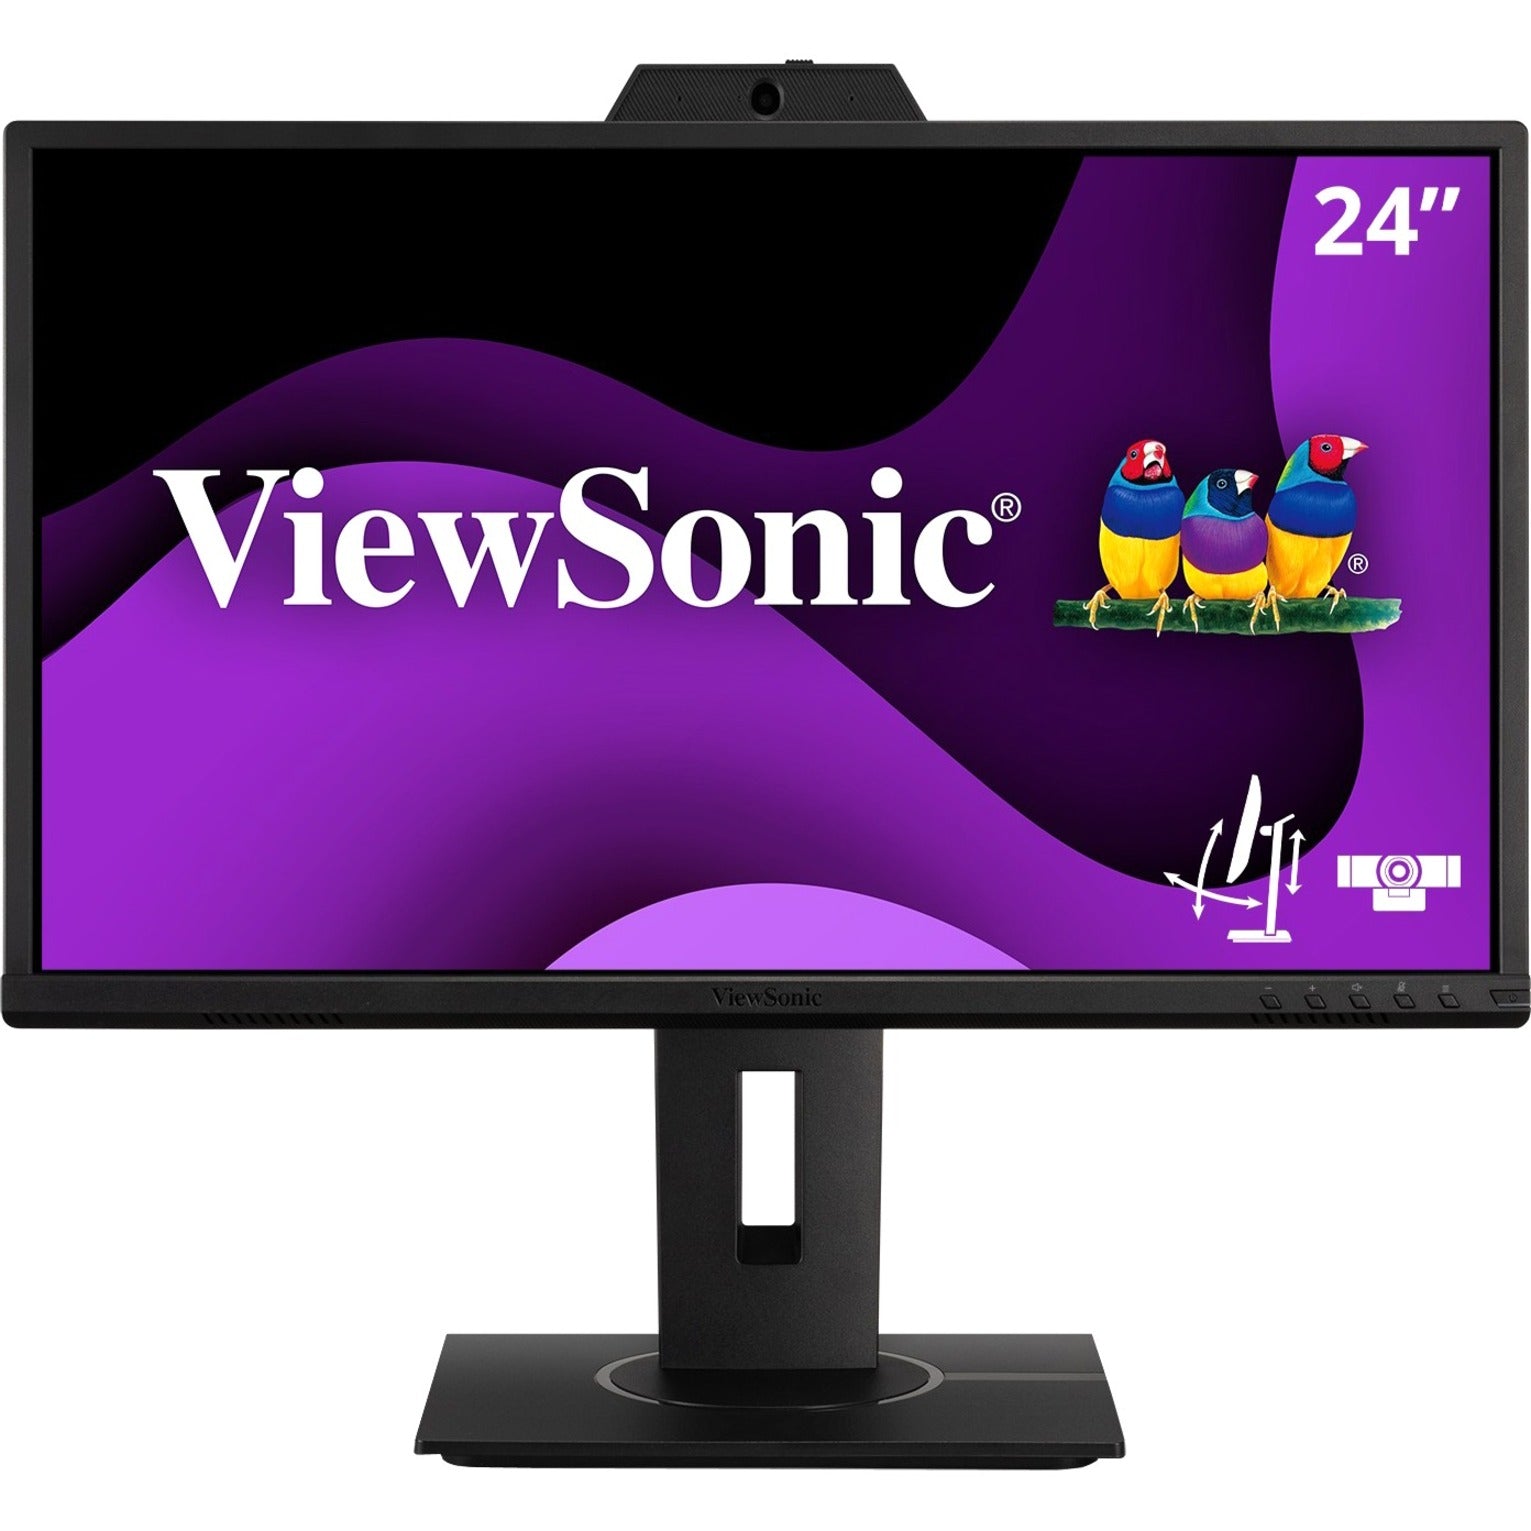 ViewSonic VG2440V 24 Video Conference Monitor with Built-in Webcam, 1920x1080 Resolution